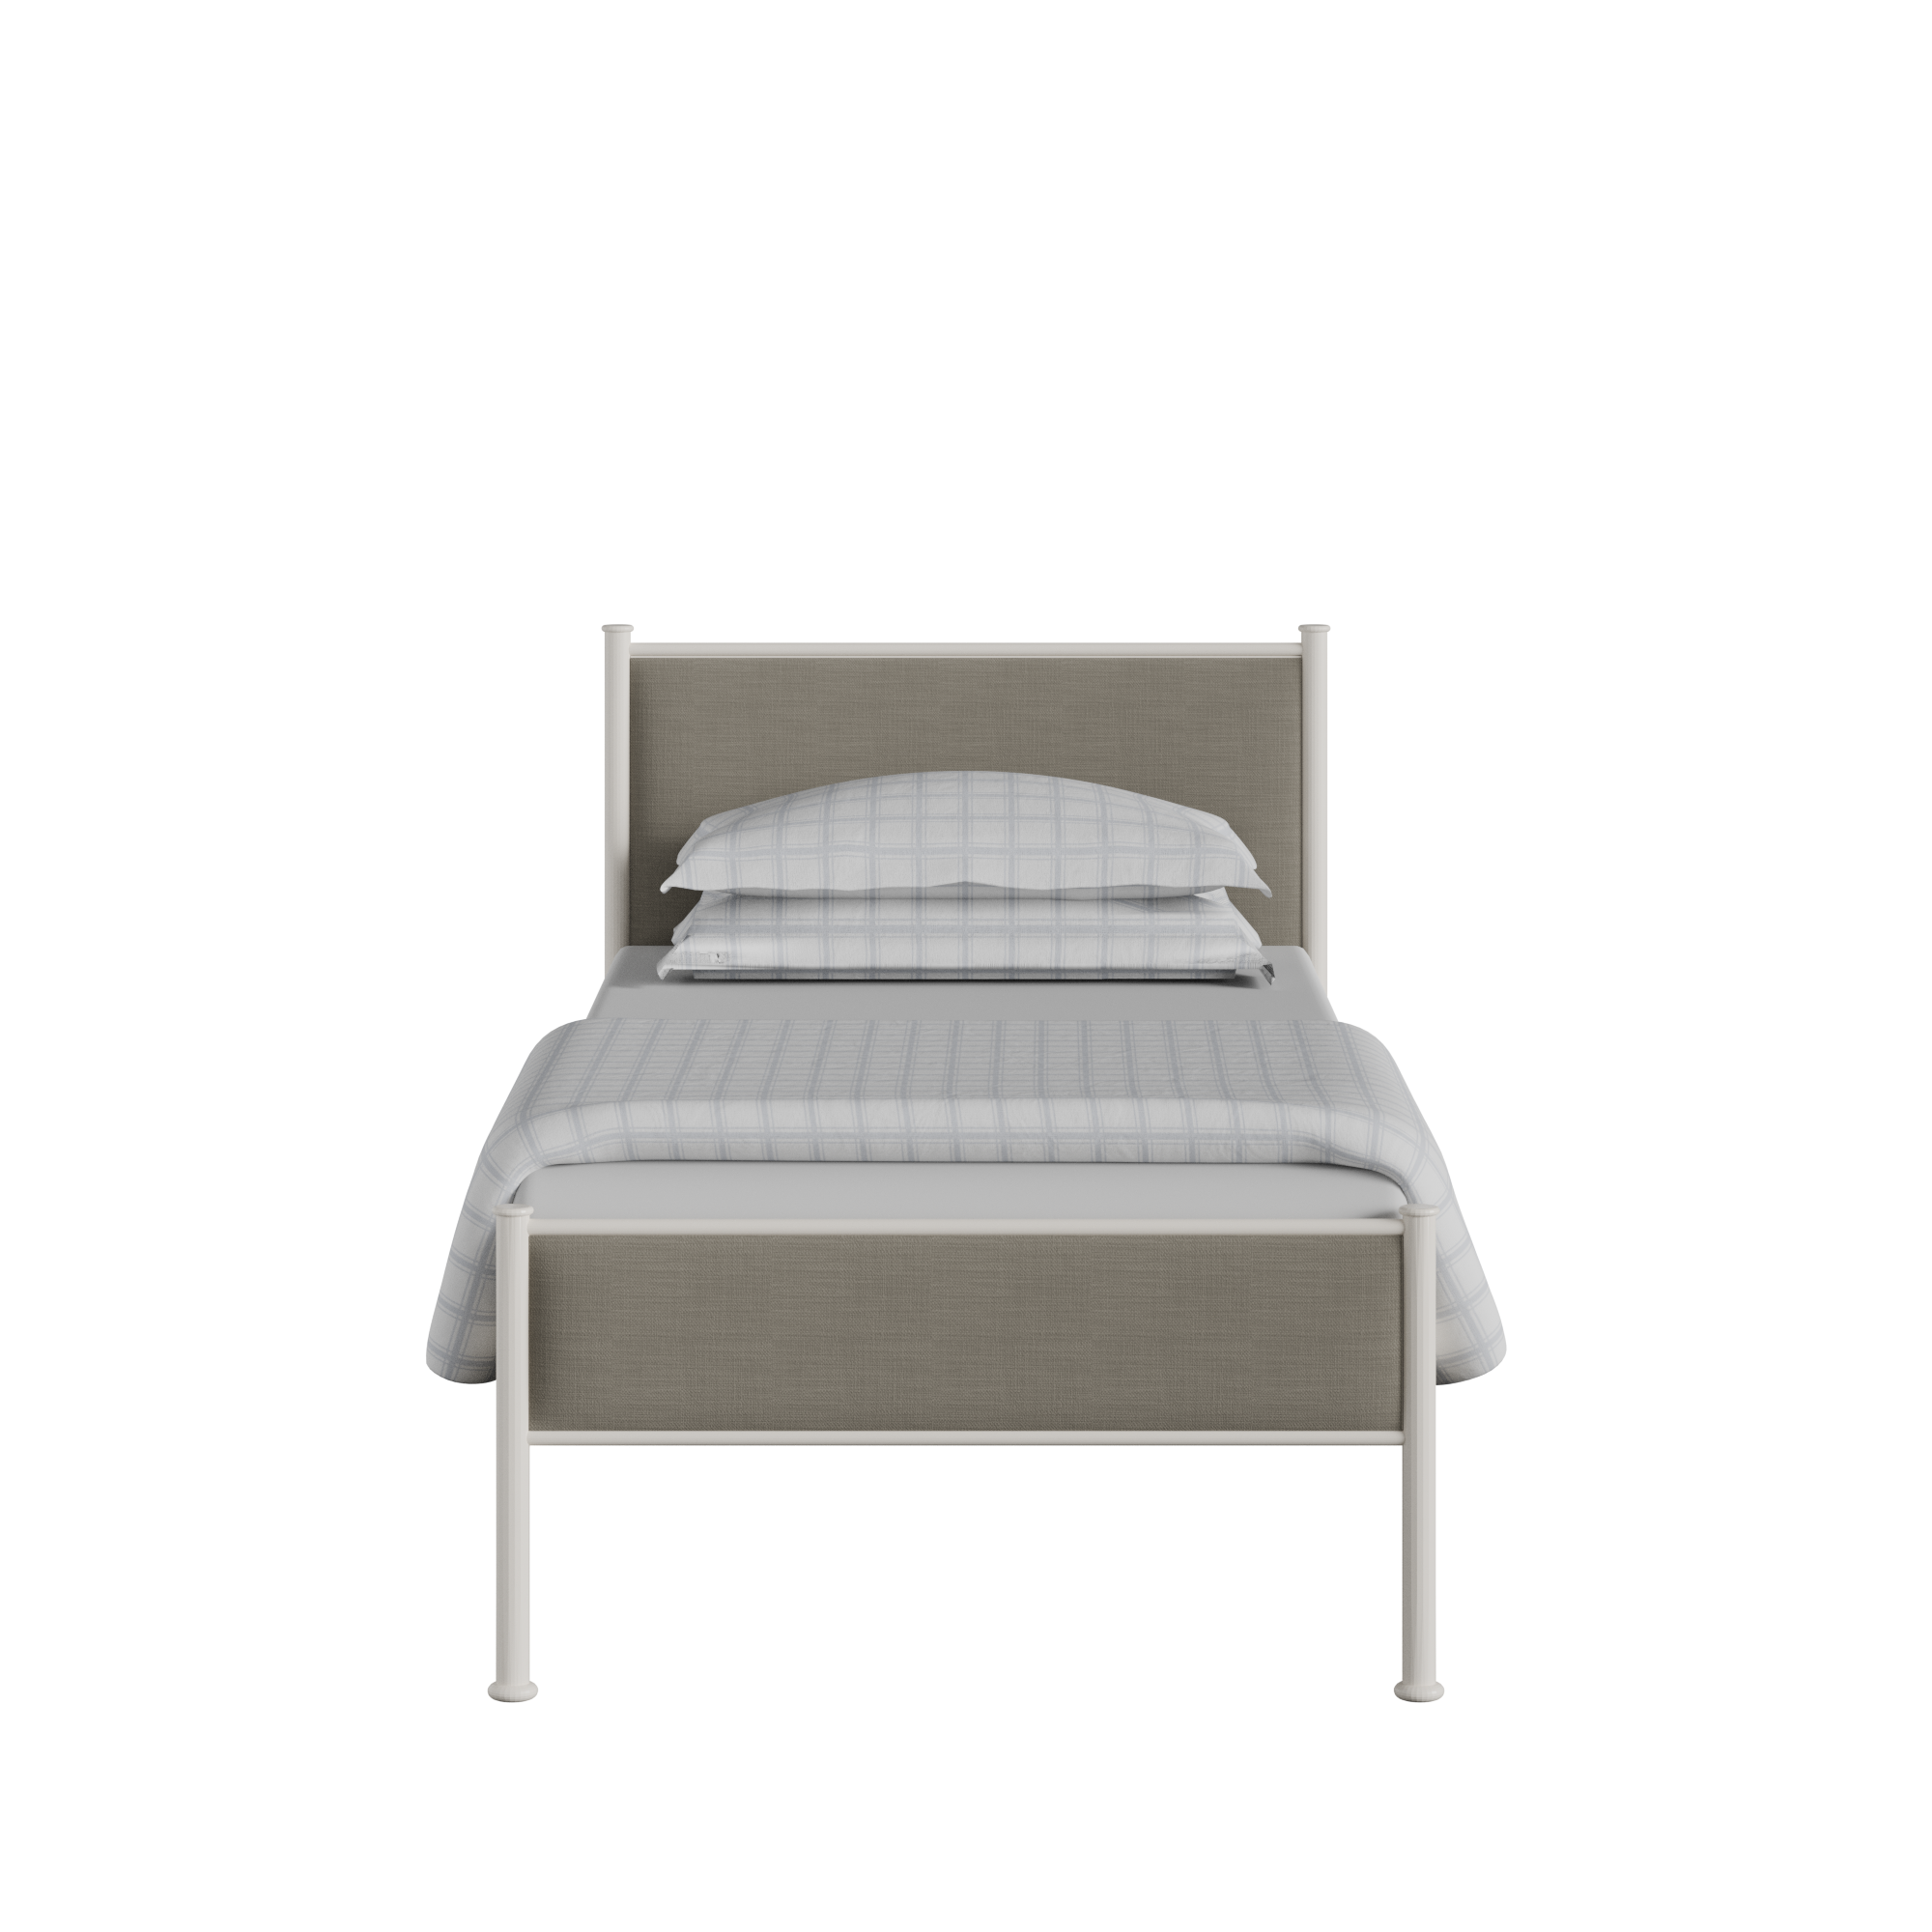 Brest iron/metal single bed in ivory